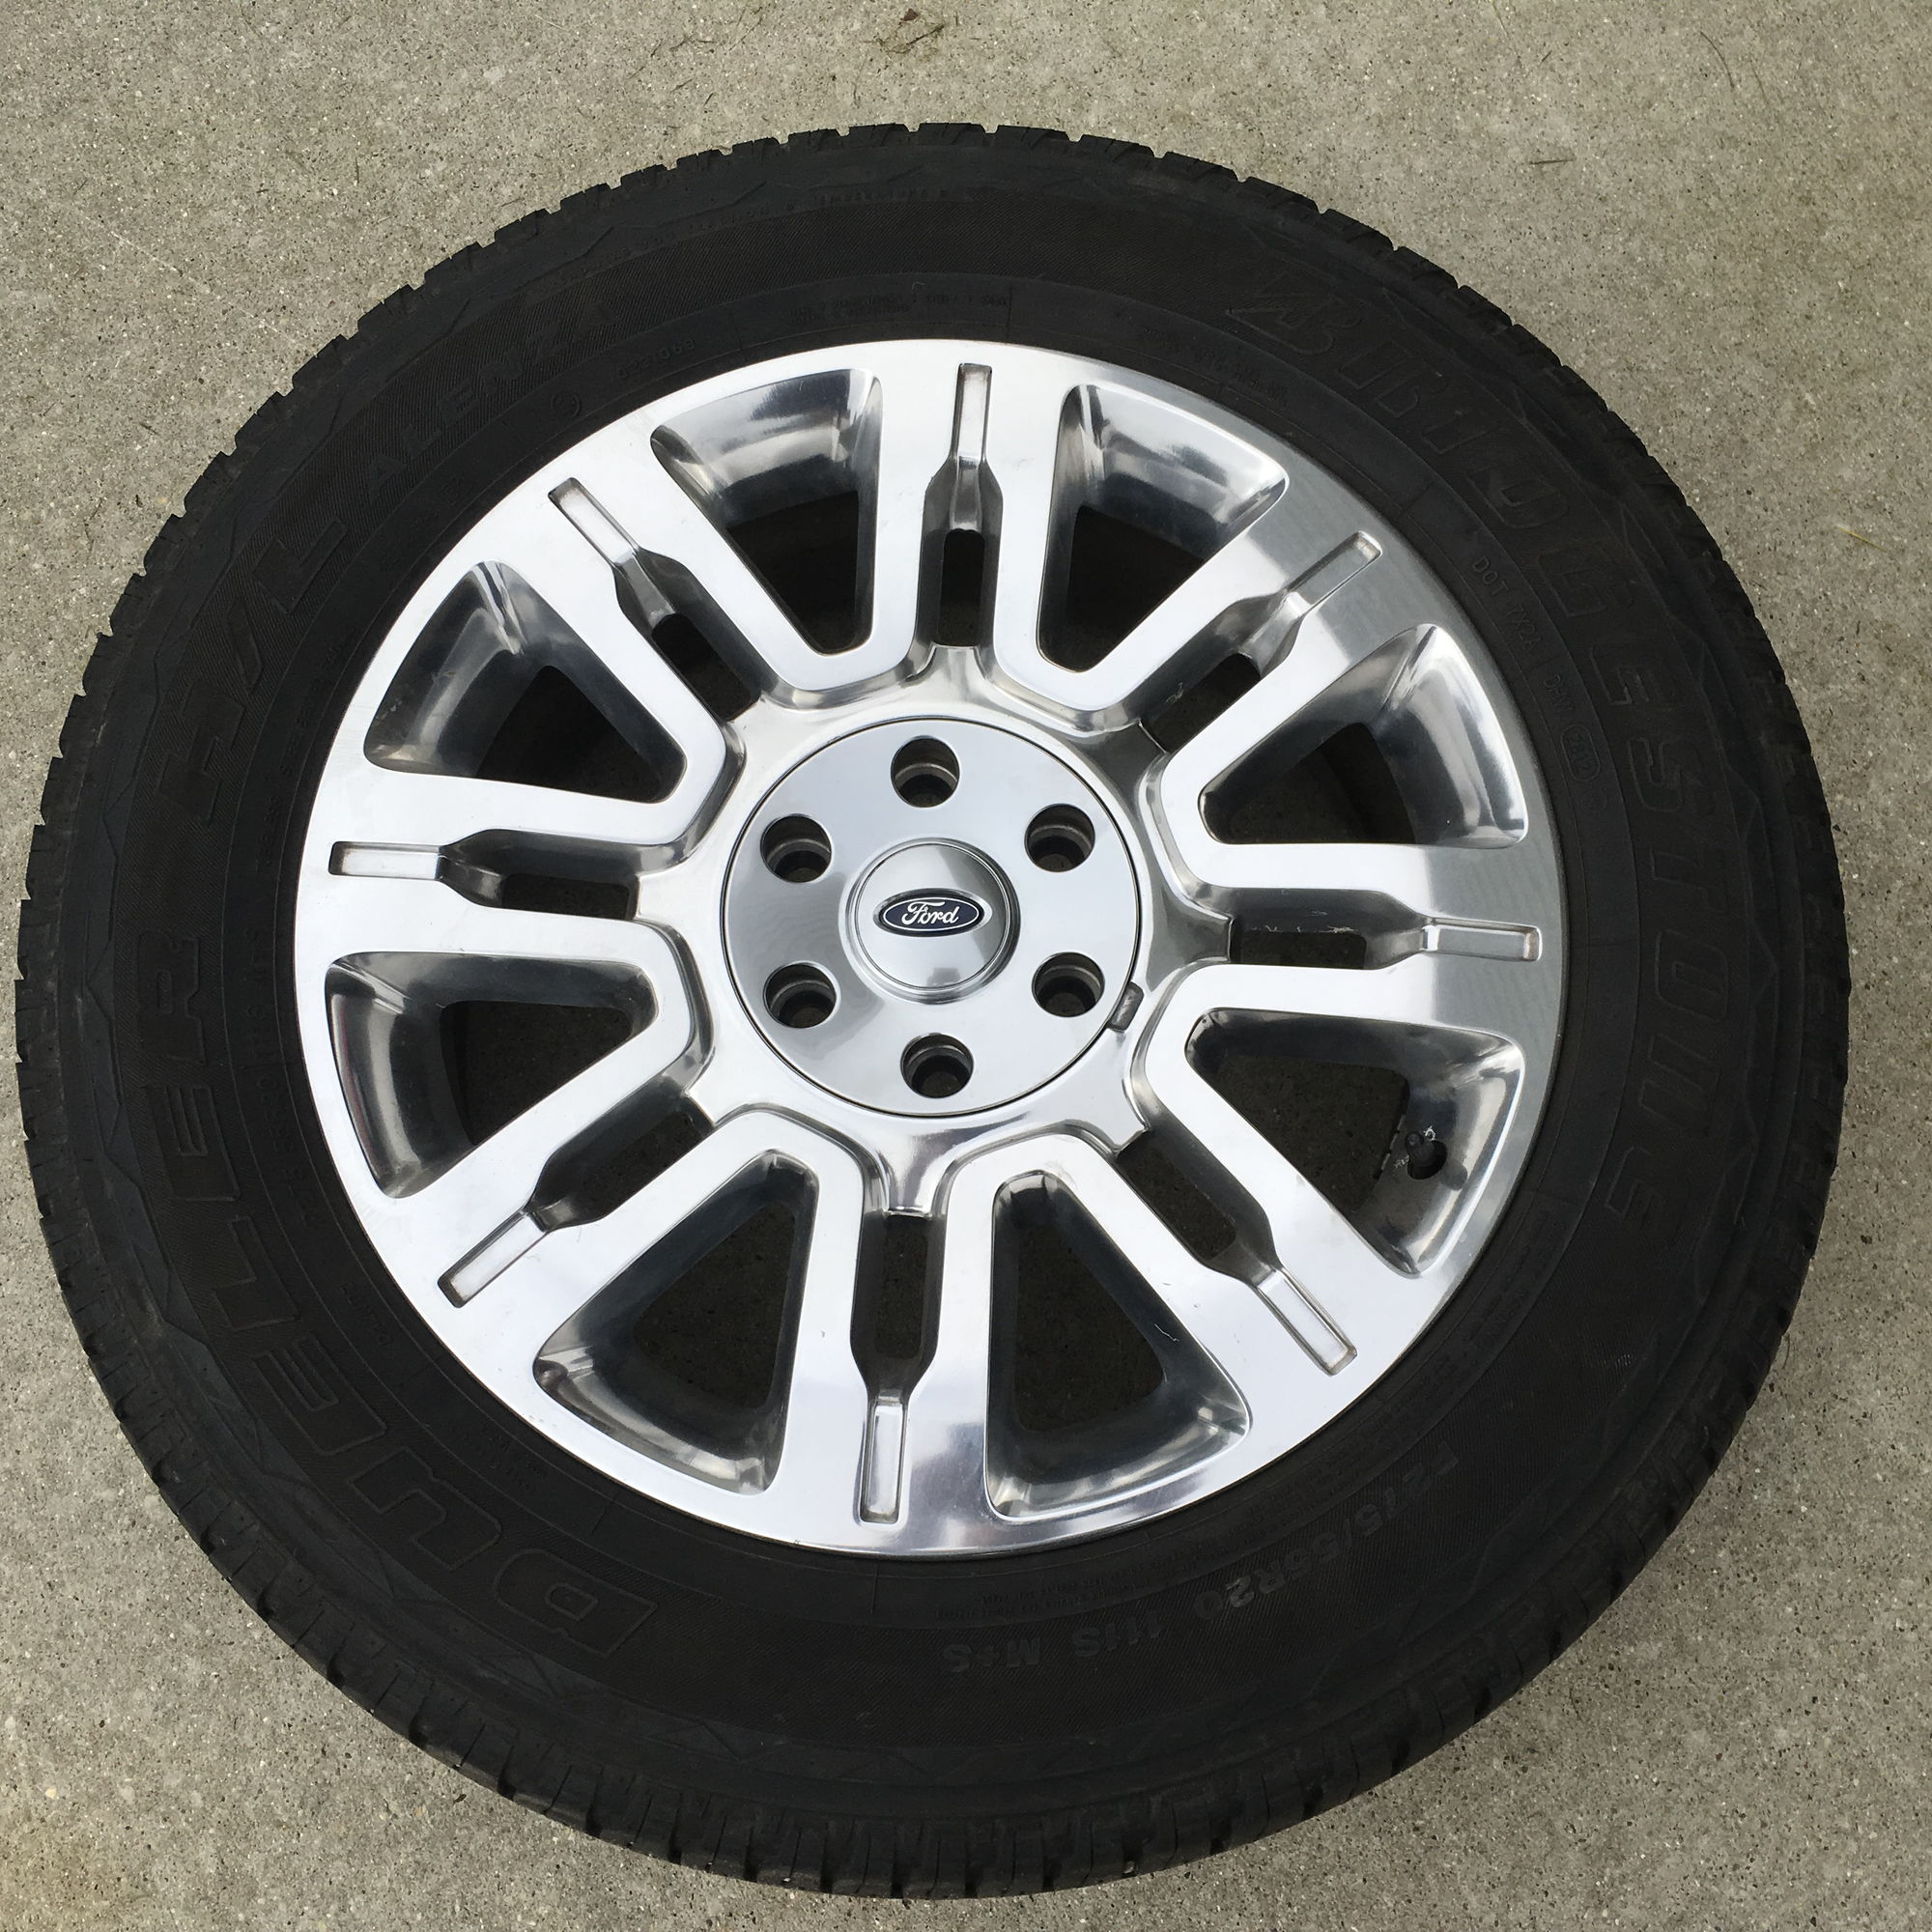 2013 F 150 Platinum Wheelstires Ford Truck Enthusiasts Forums